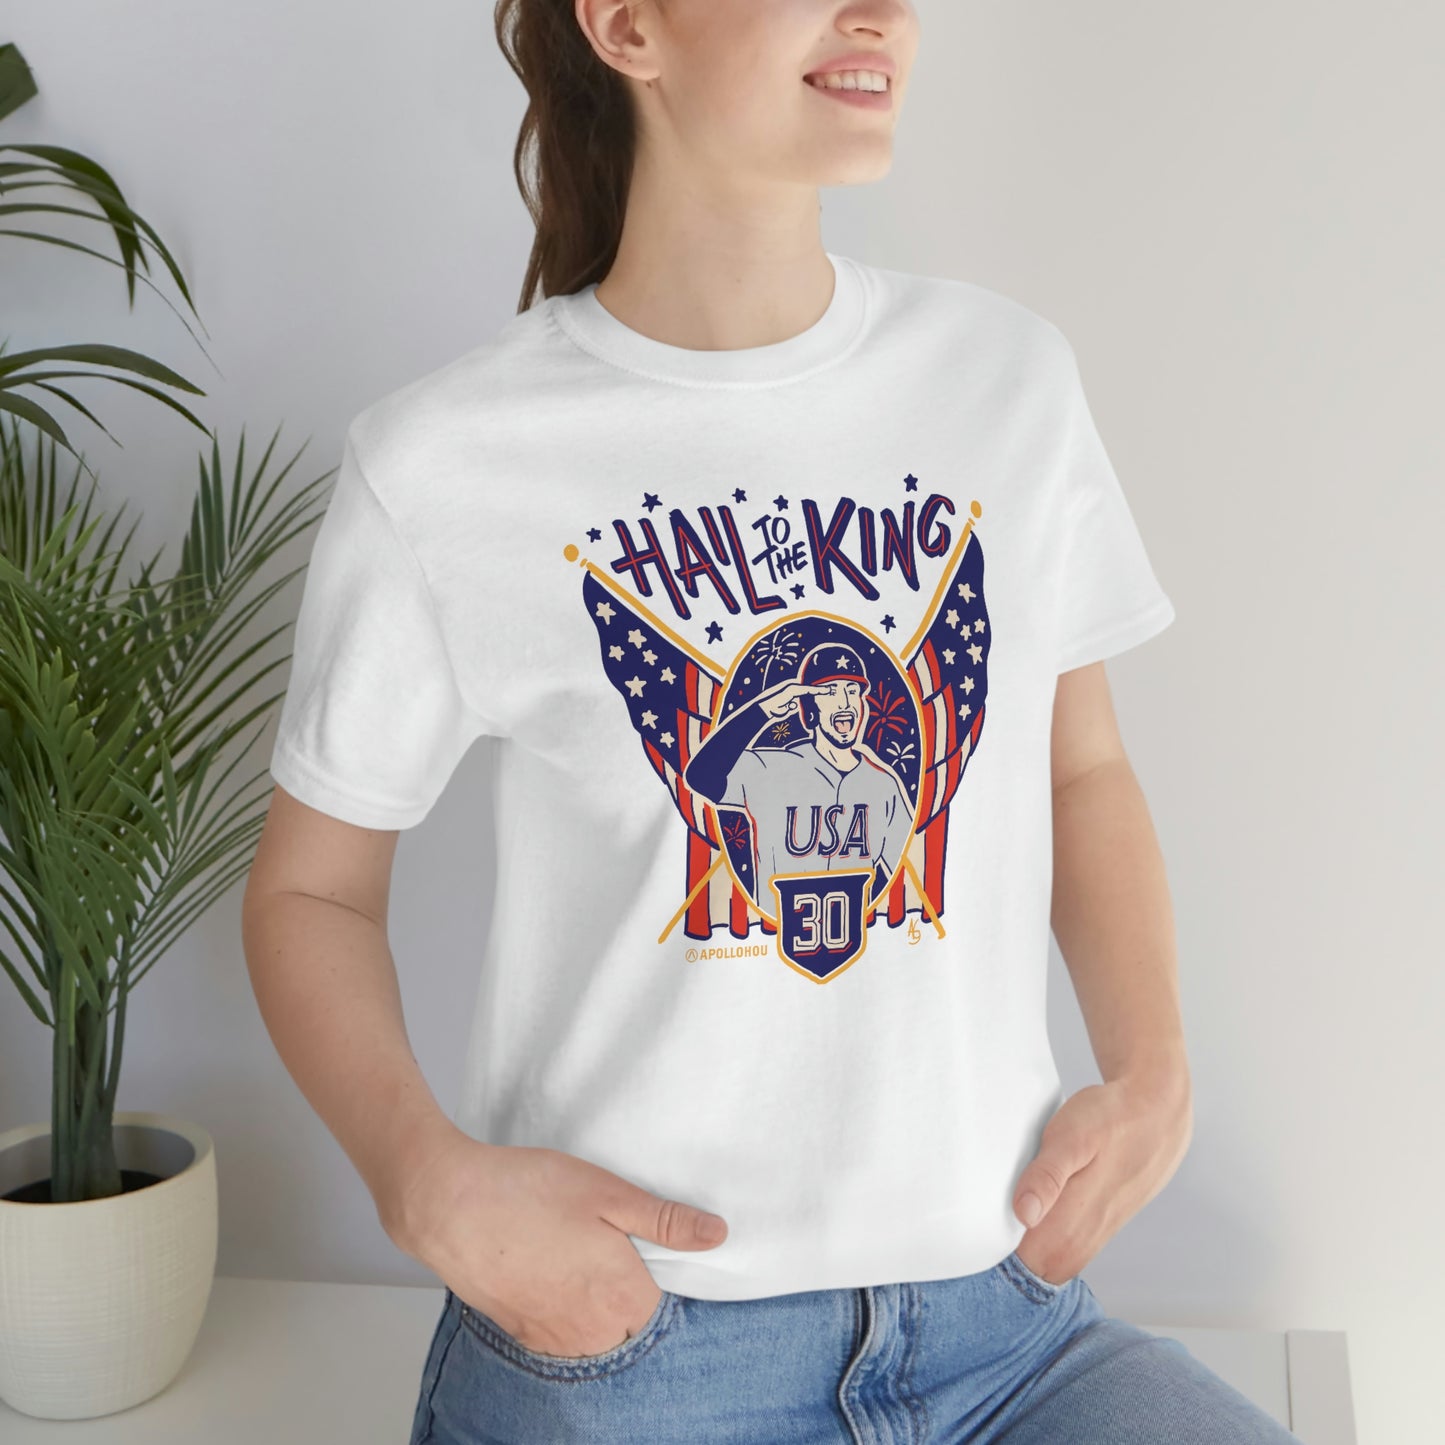 Hail To The King Unisex Jersey Tee